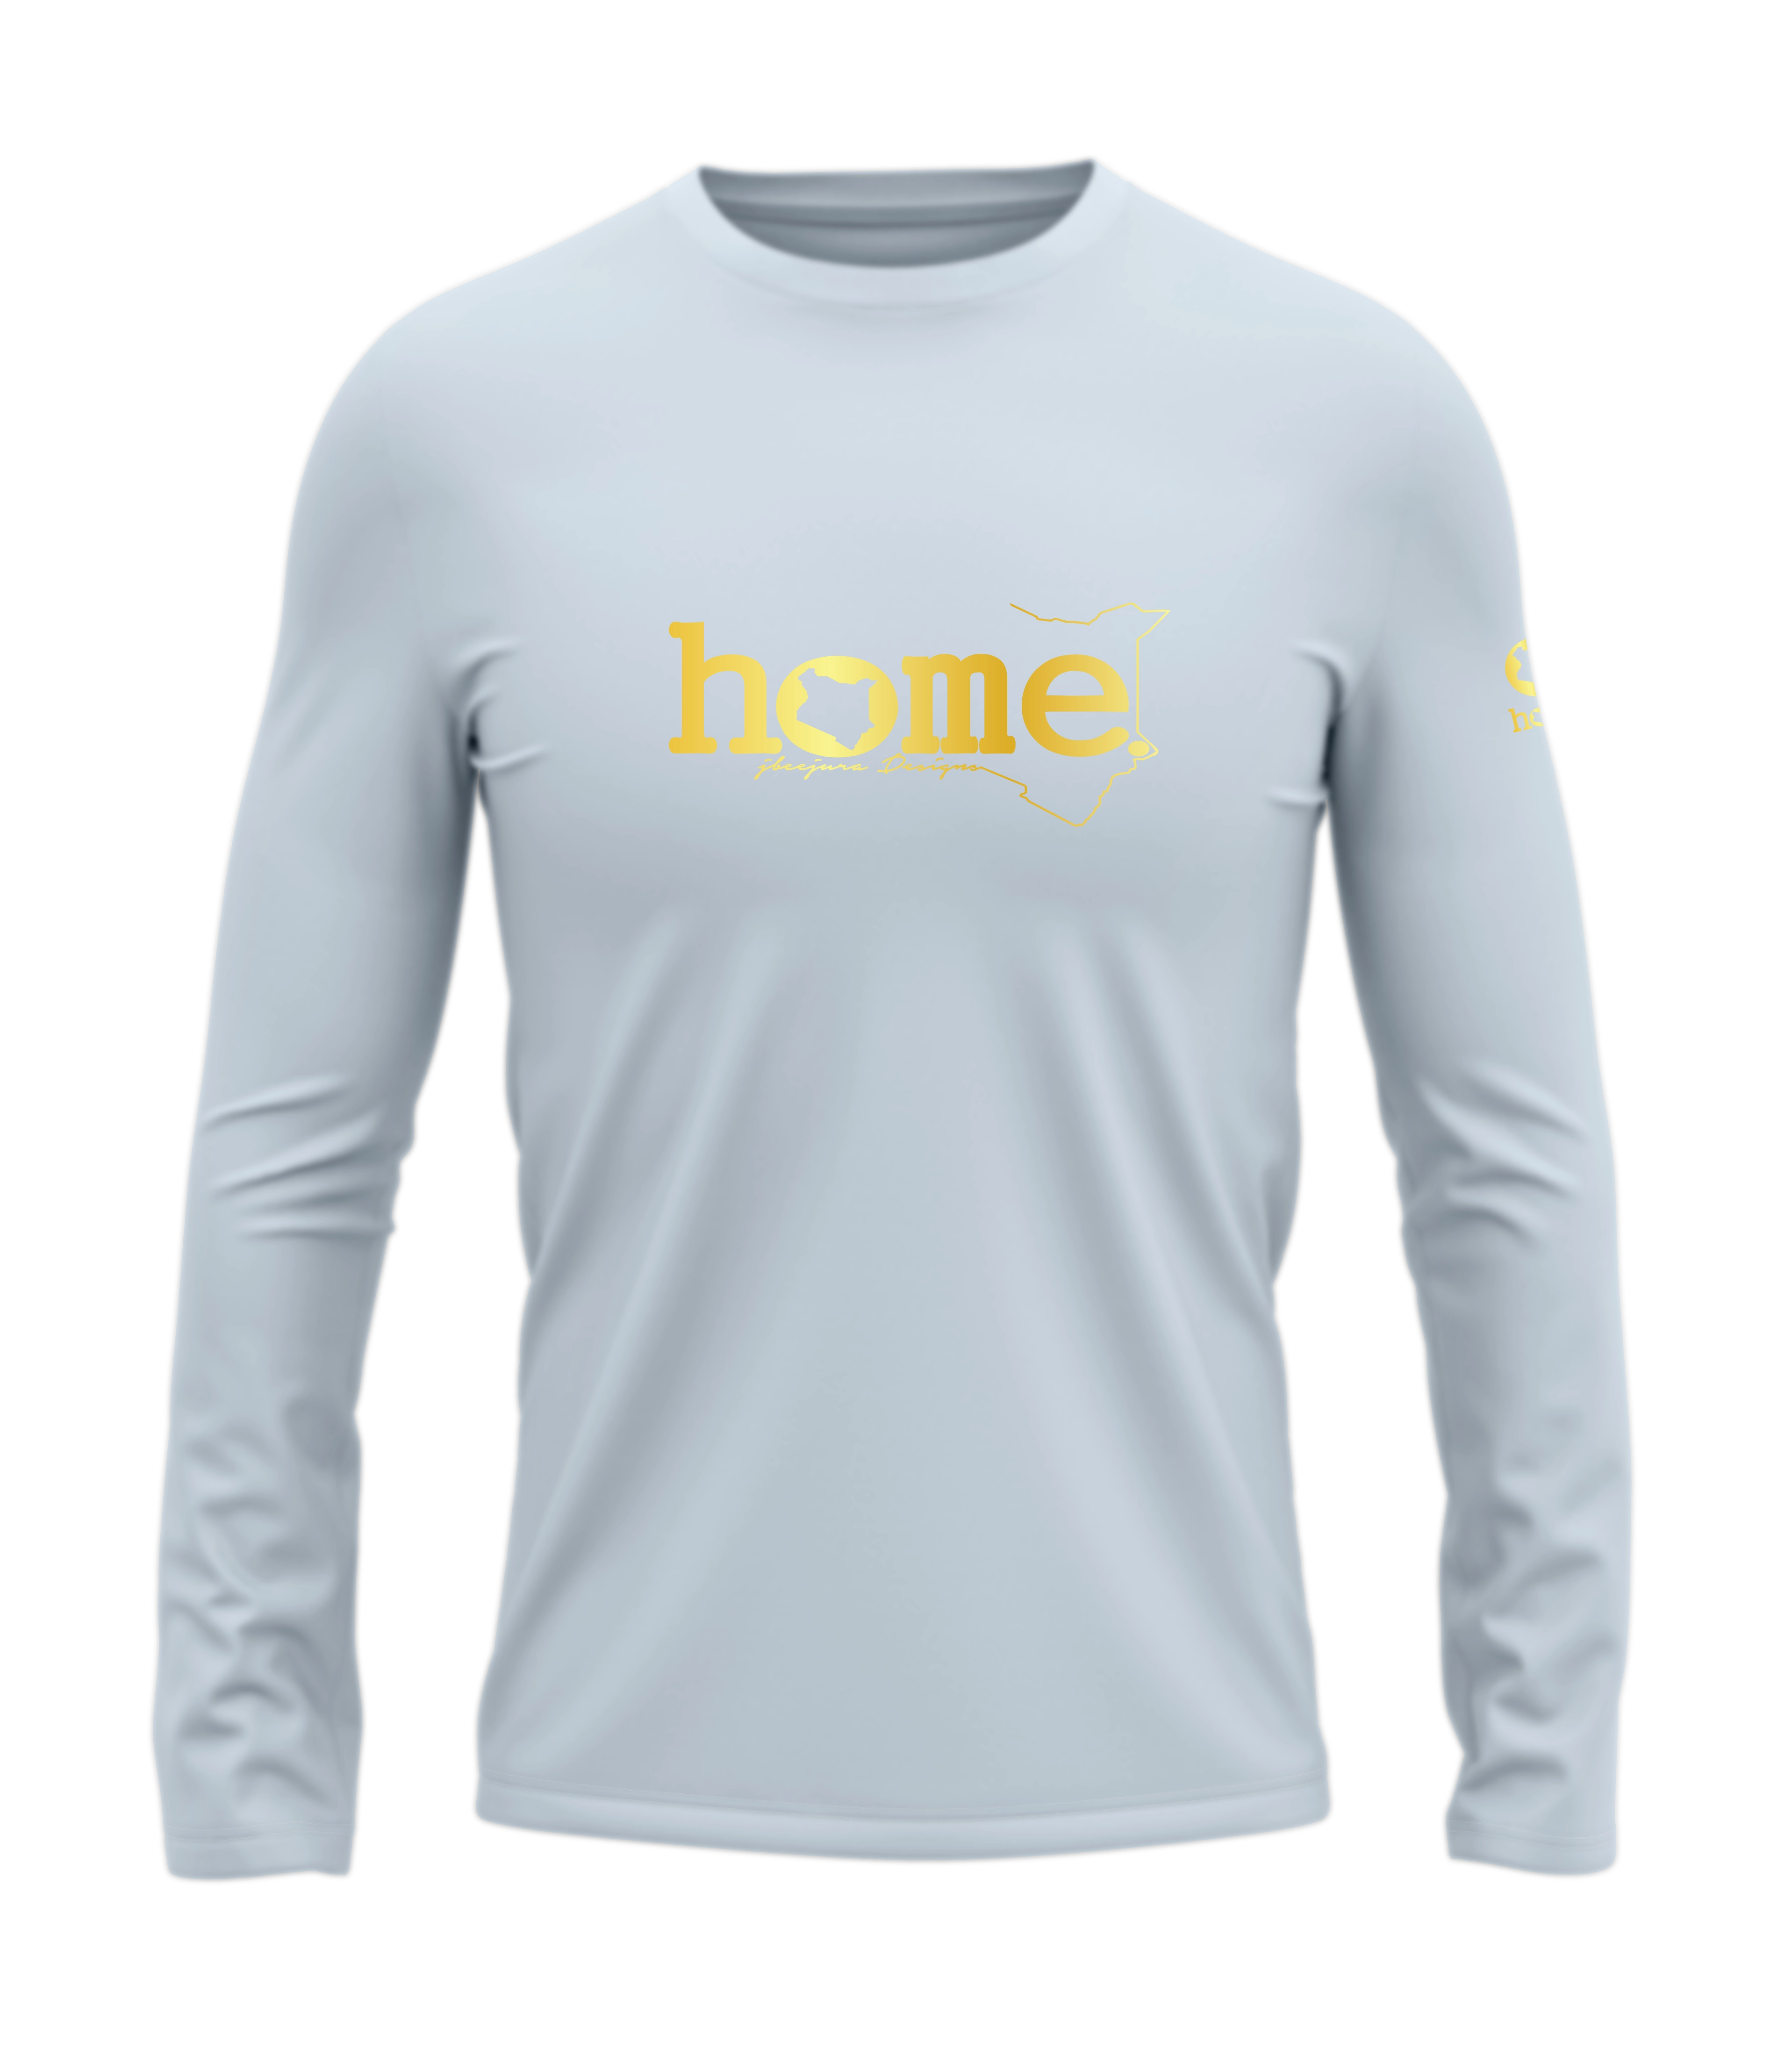 home_254 LONG-SLEEVED SKY-BLUE T-SHIRT WITH A GOLD CLASSIC WORDS PRINT – COTTON PLUS FABRIC